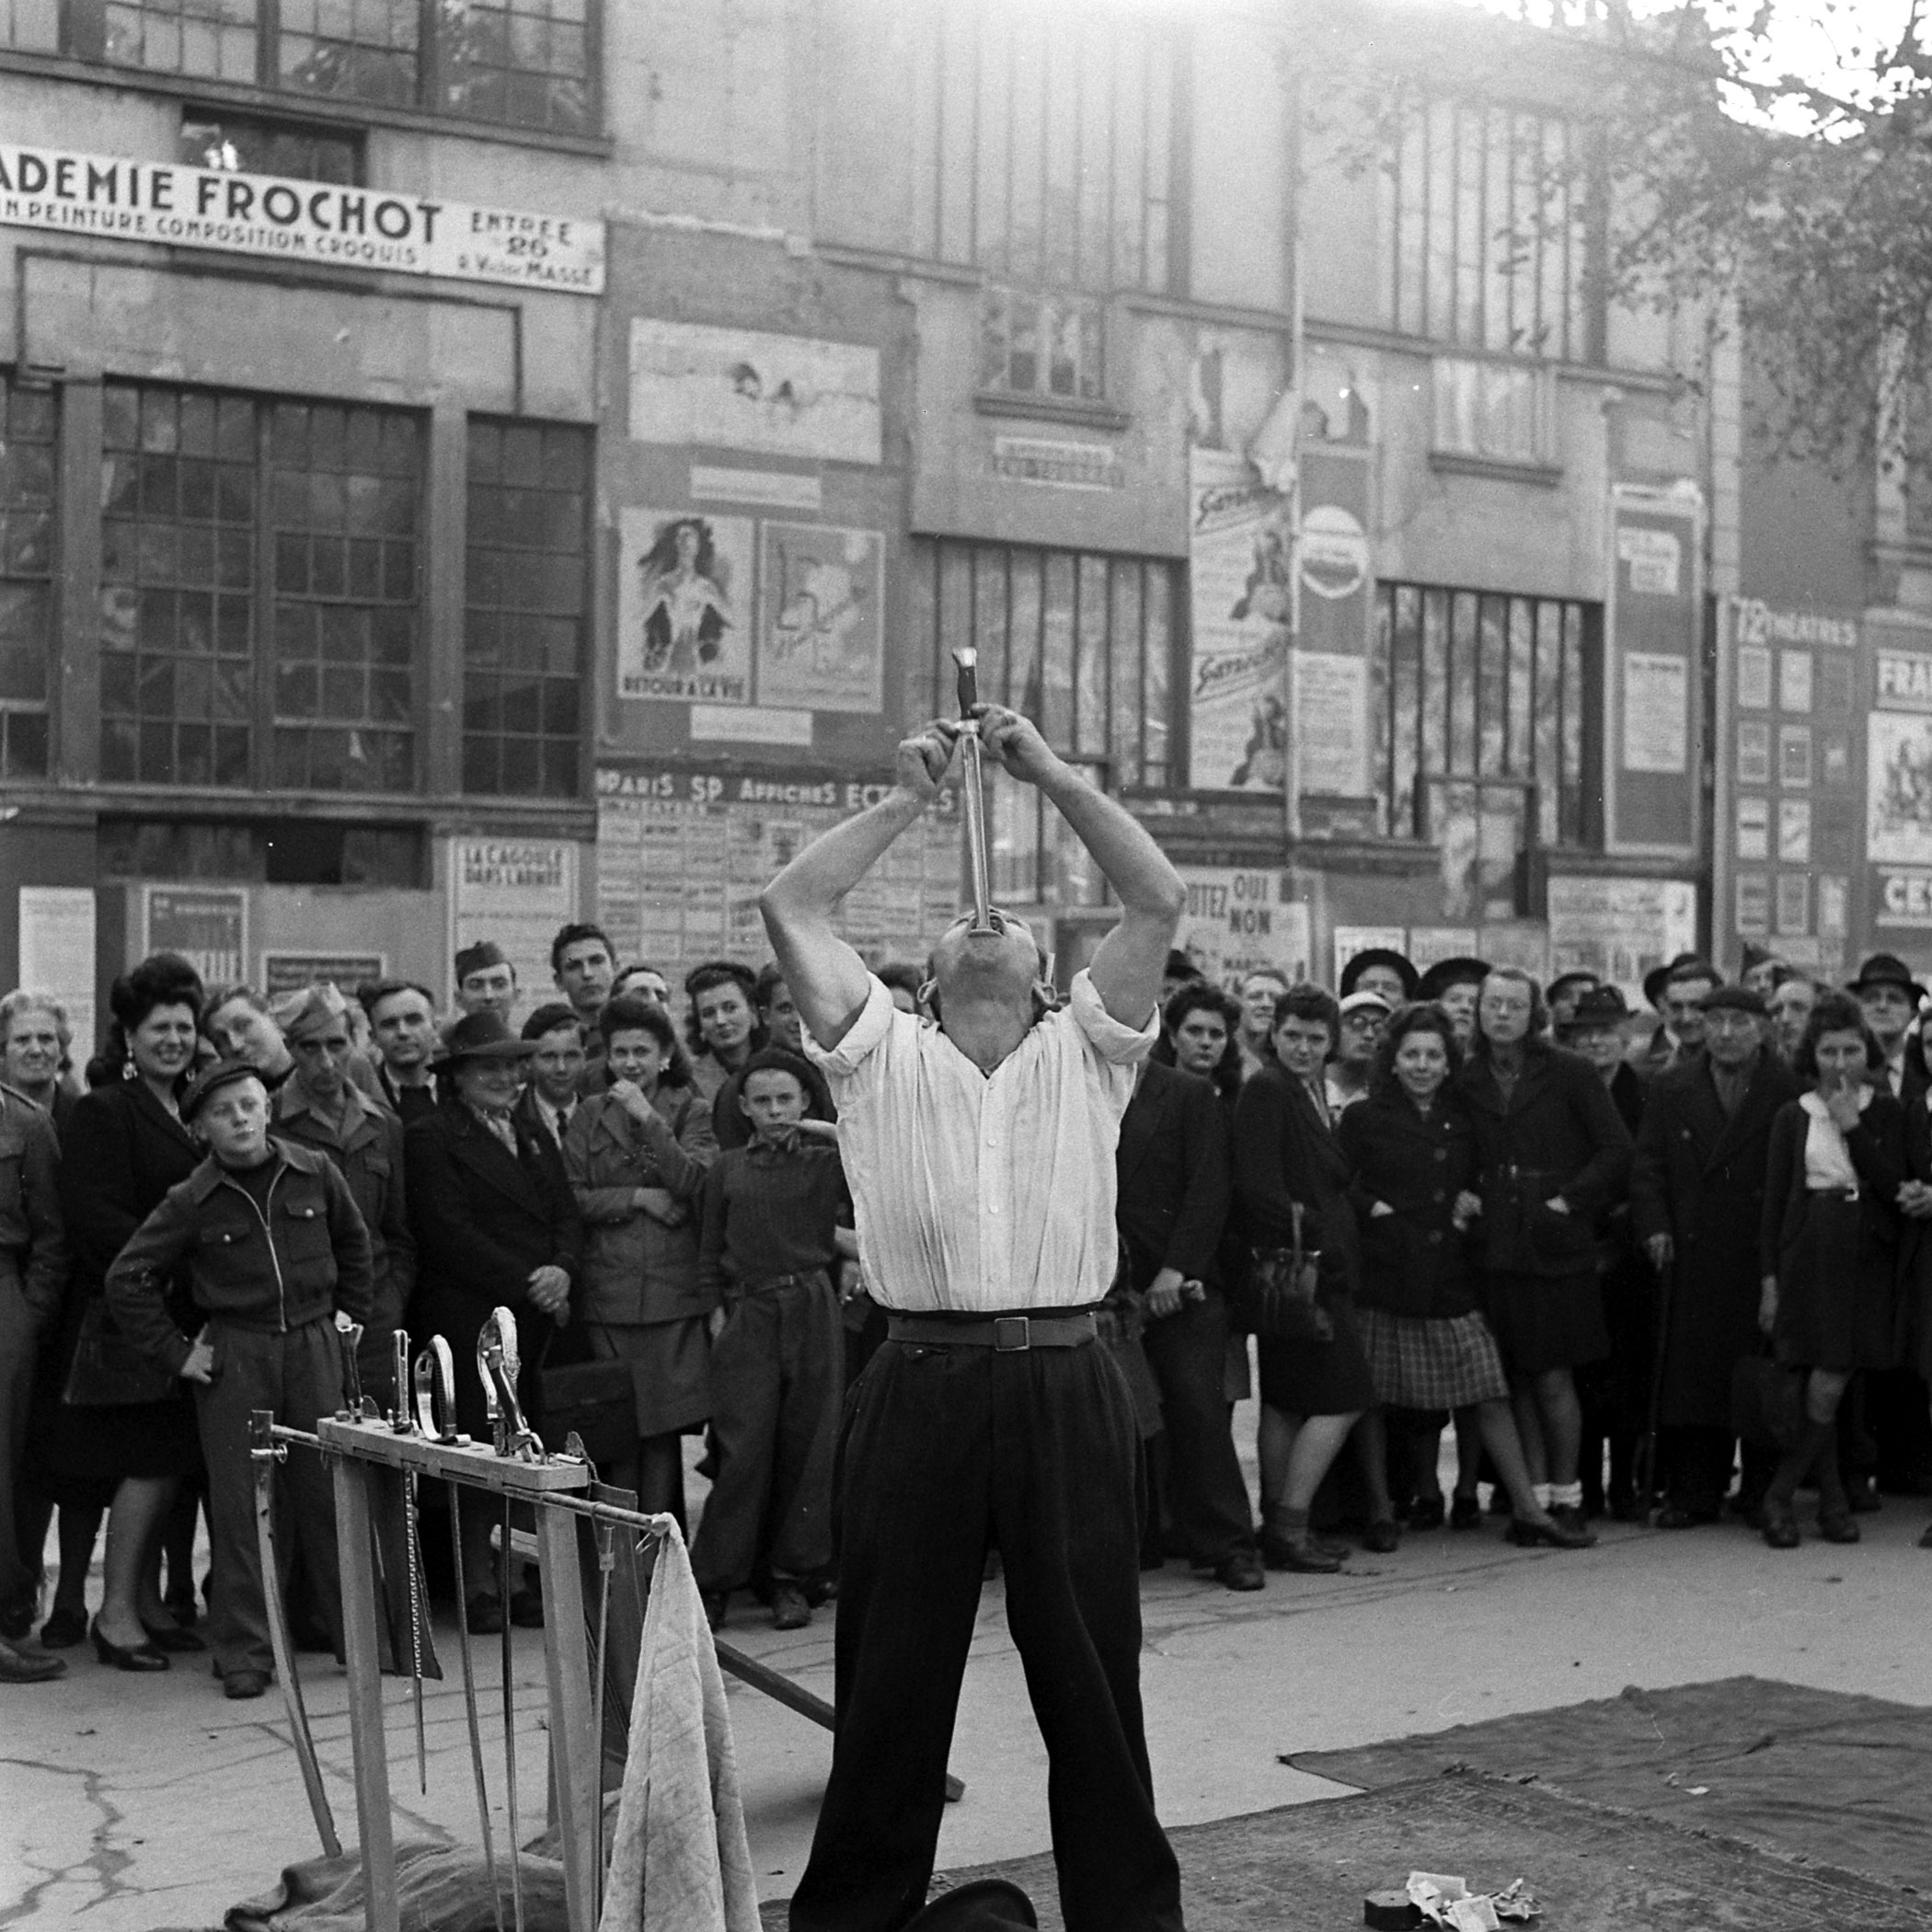 Sword Swallower in the Pigalle section of Paris, 1945.